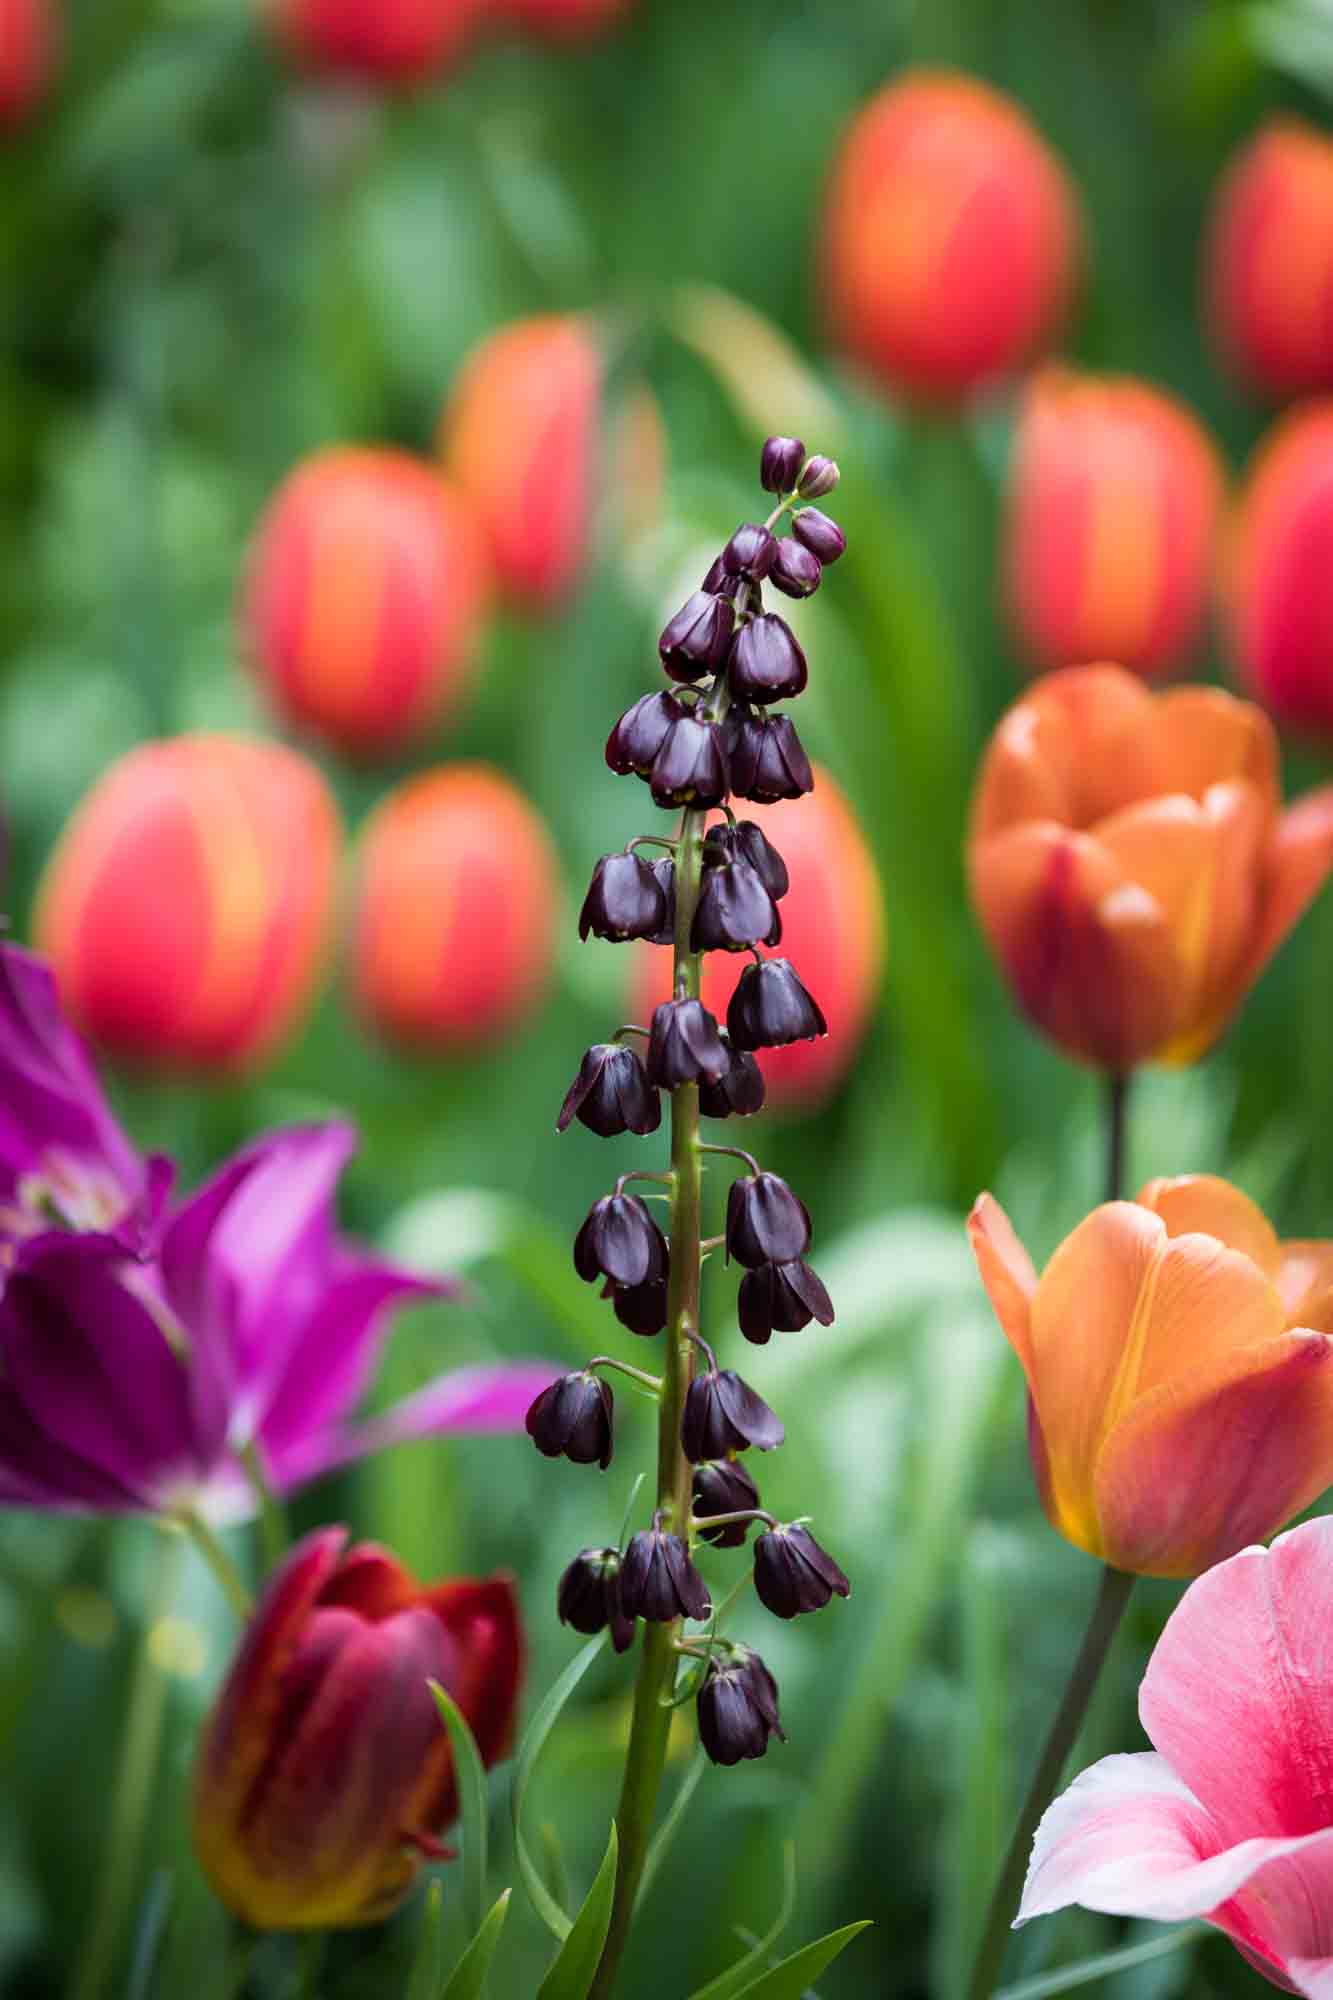 Colorful flowers in Central Park's Shakespeare Garden